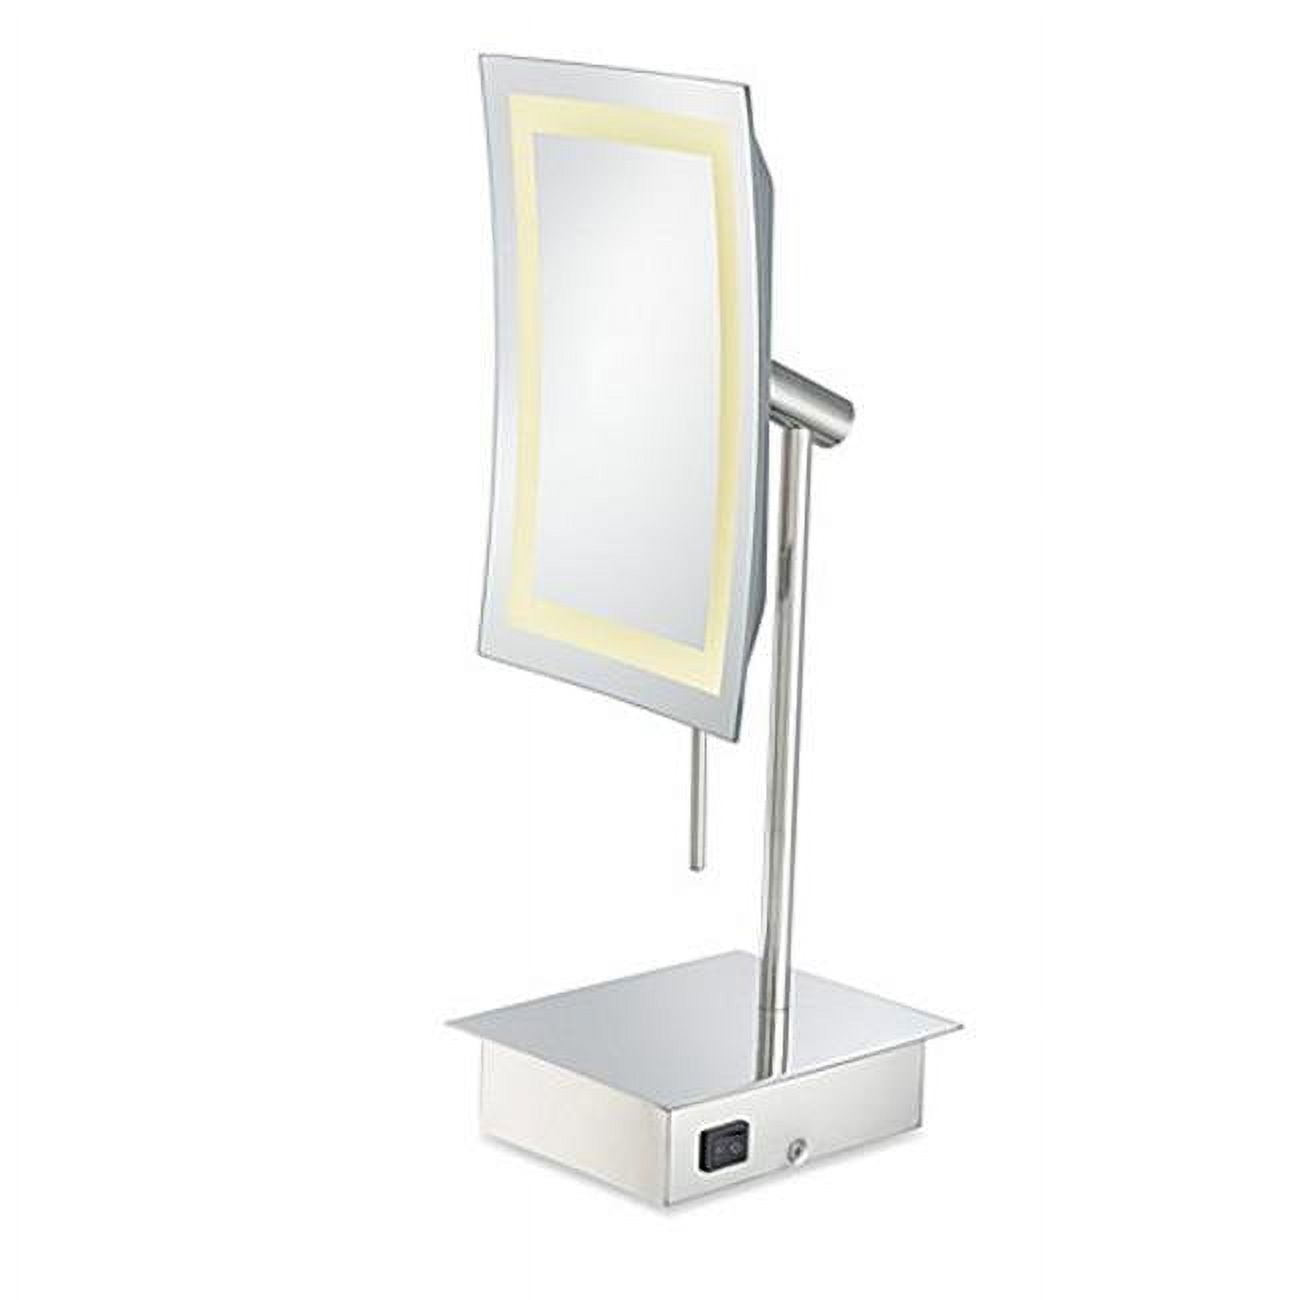 Picture of Aptations 713-35-83 Single-Sided LED Square Freestanding Mirror - Rechargeable, Polished Nickel